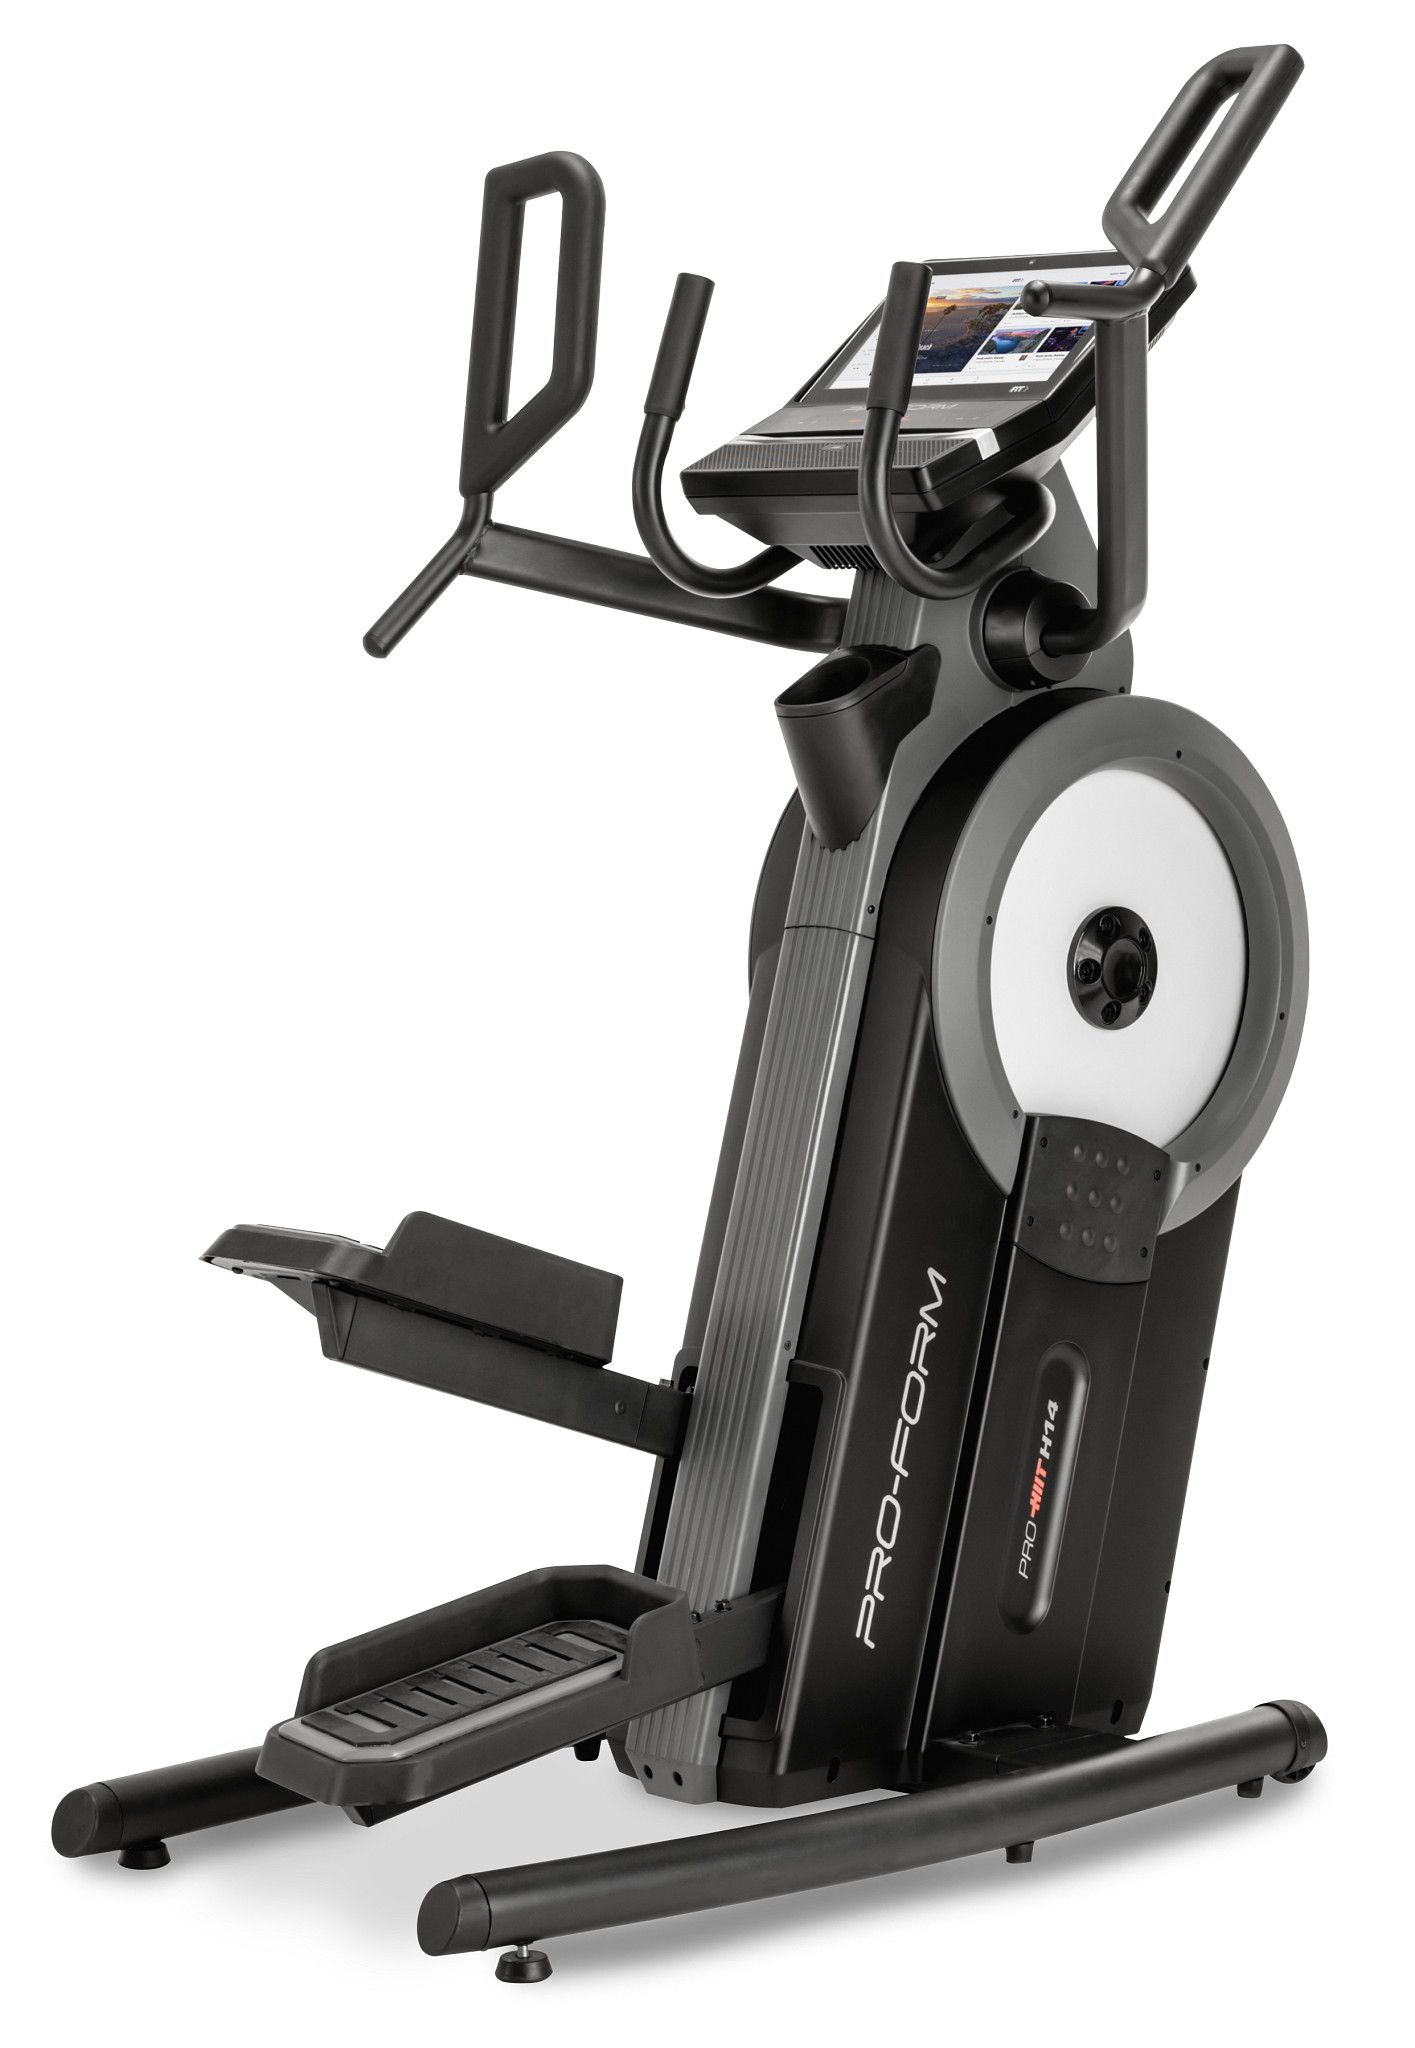 Cross-trainer Machines & at Lowes.com